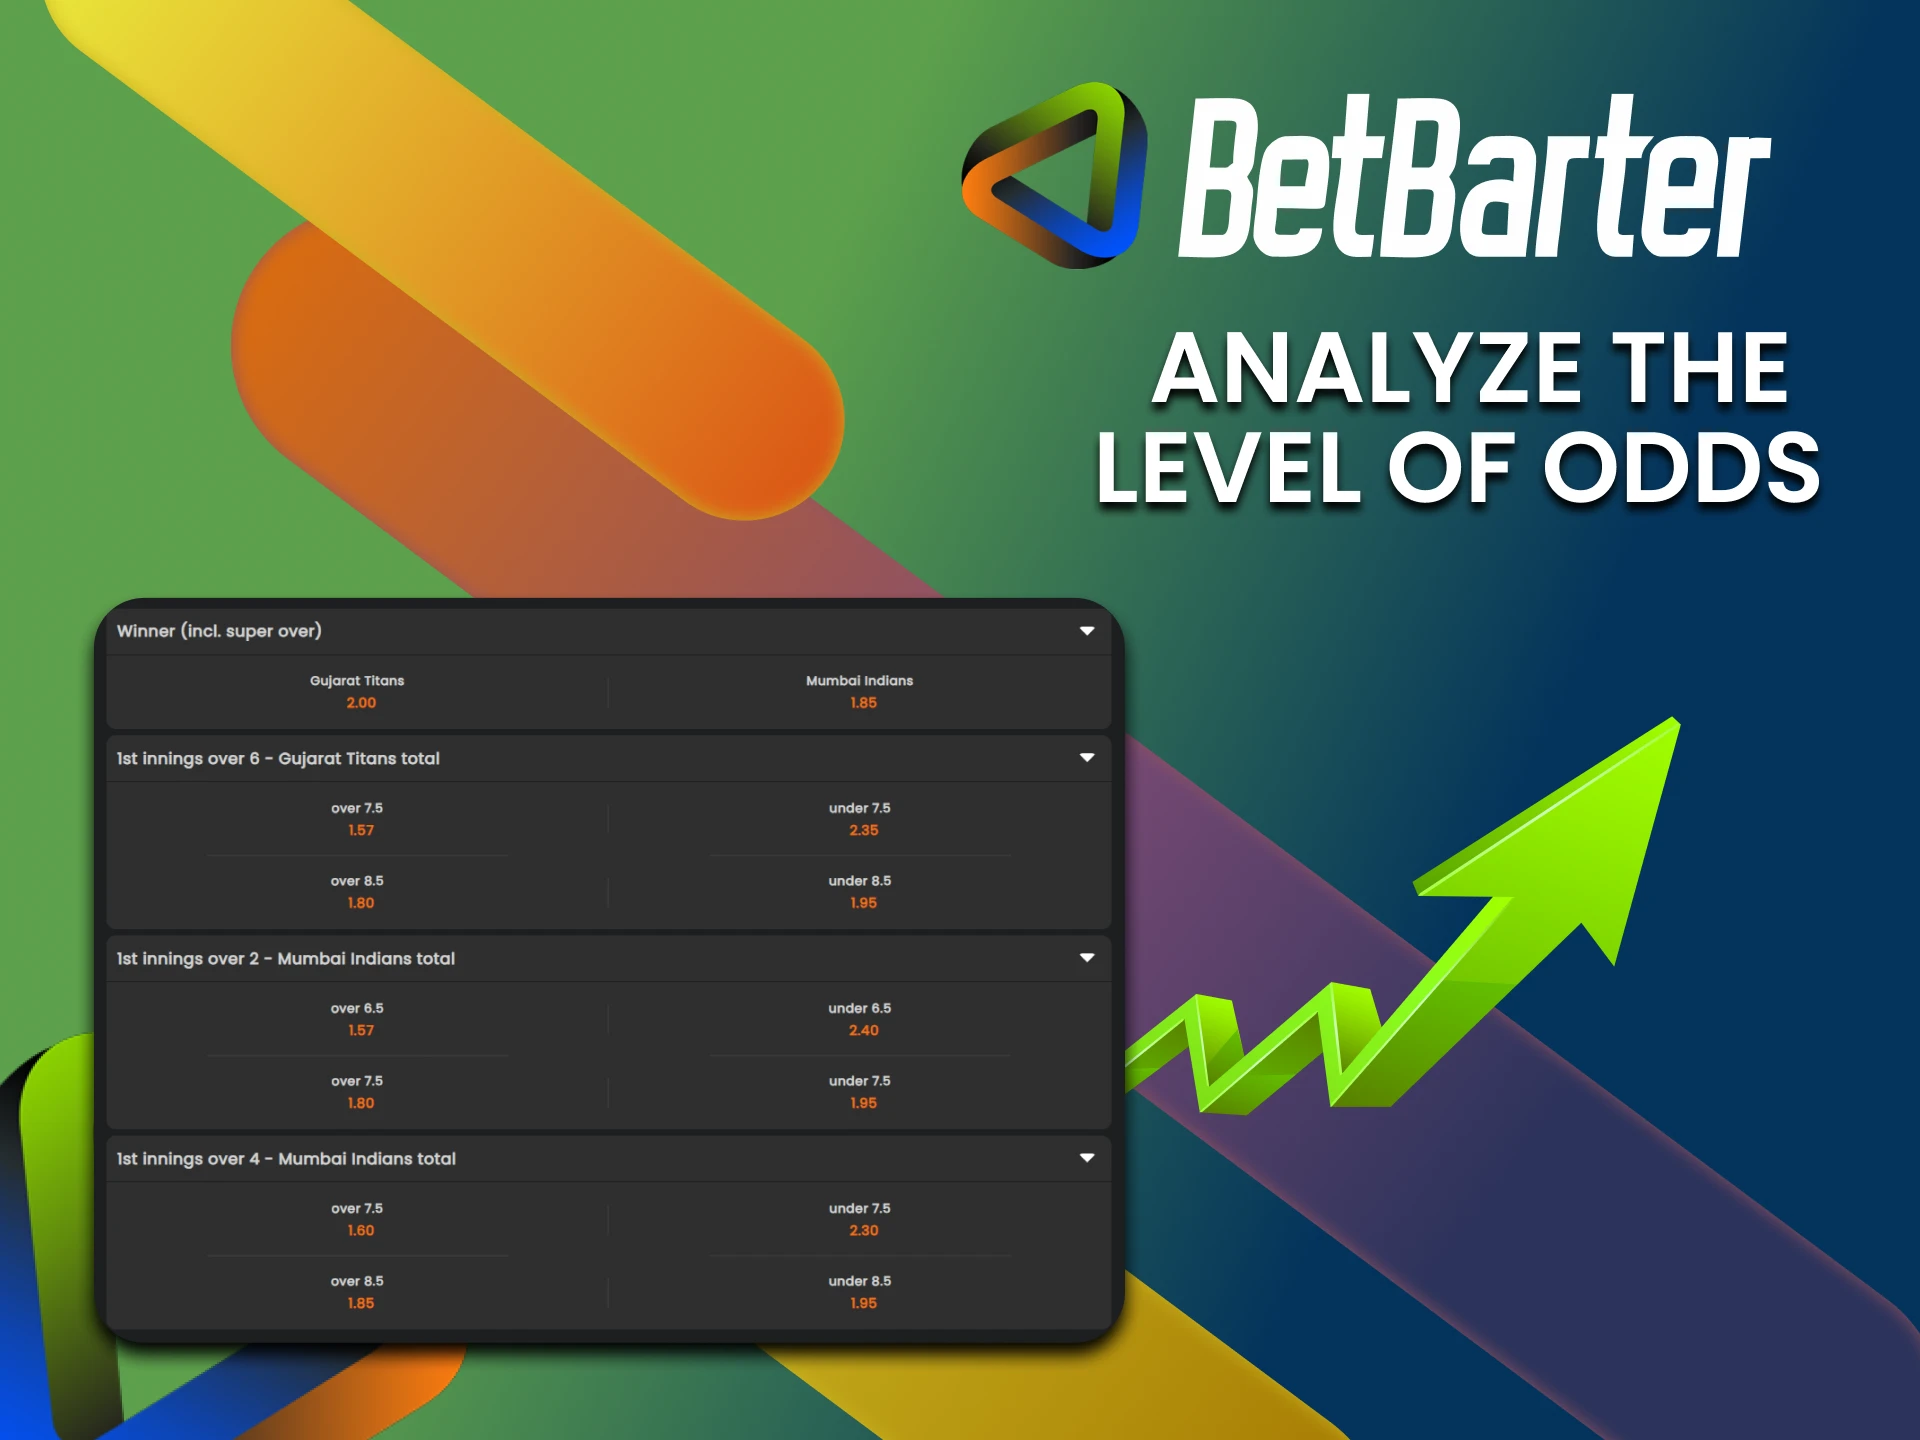 Explore betting odds for IPL teams on BetBarter.